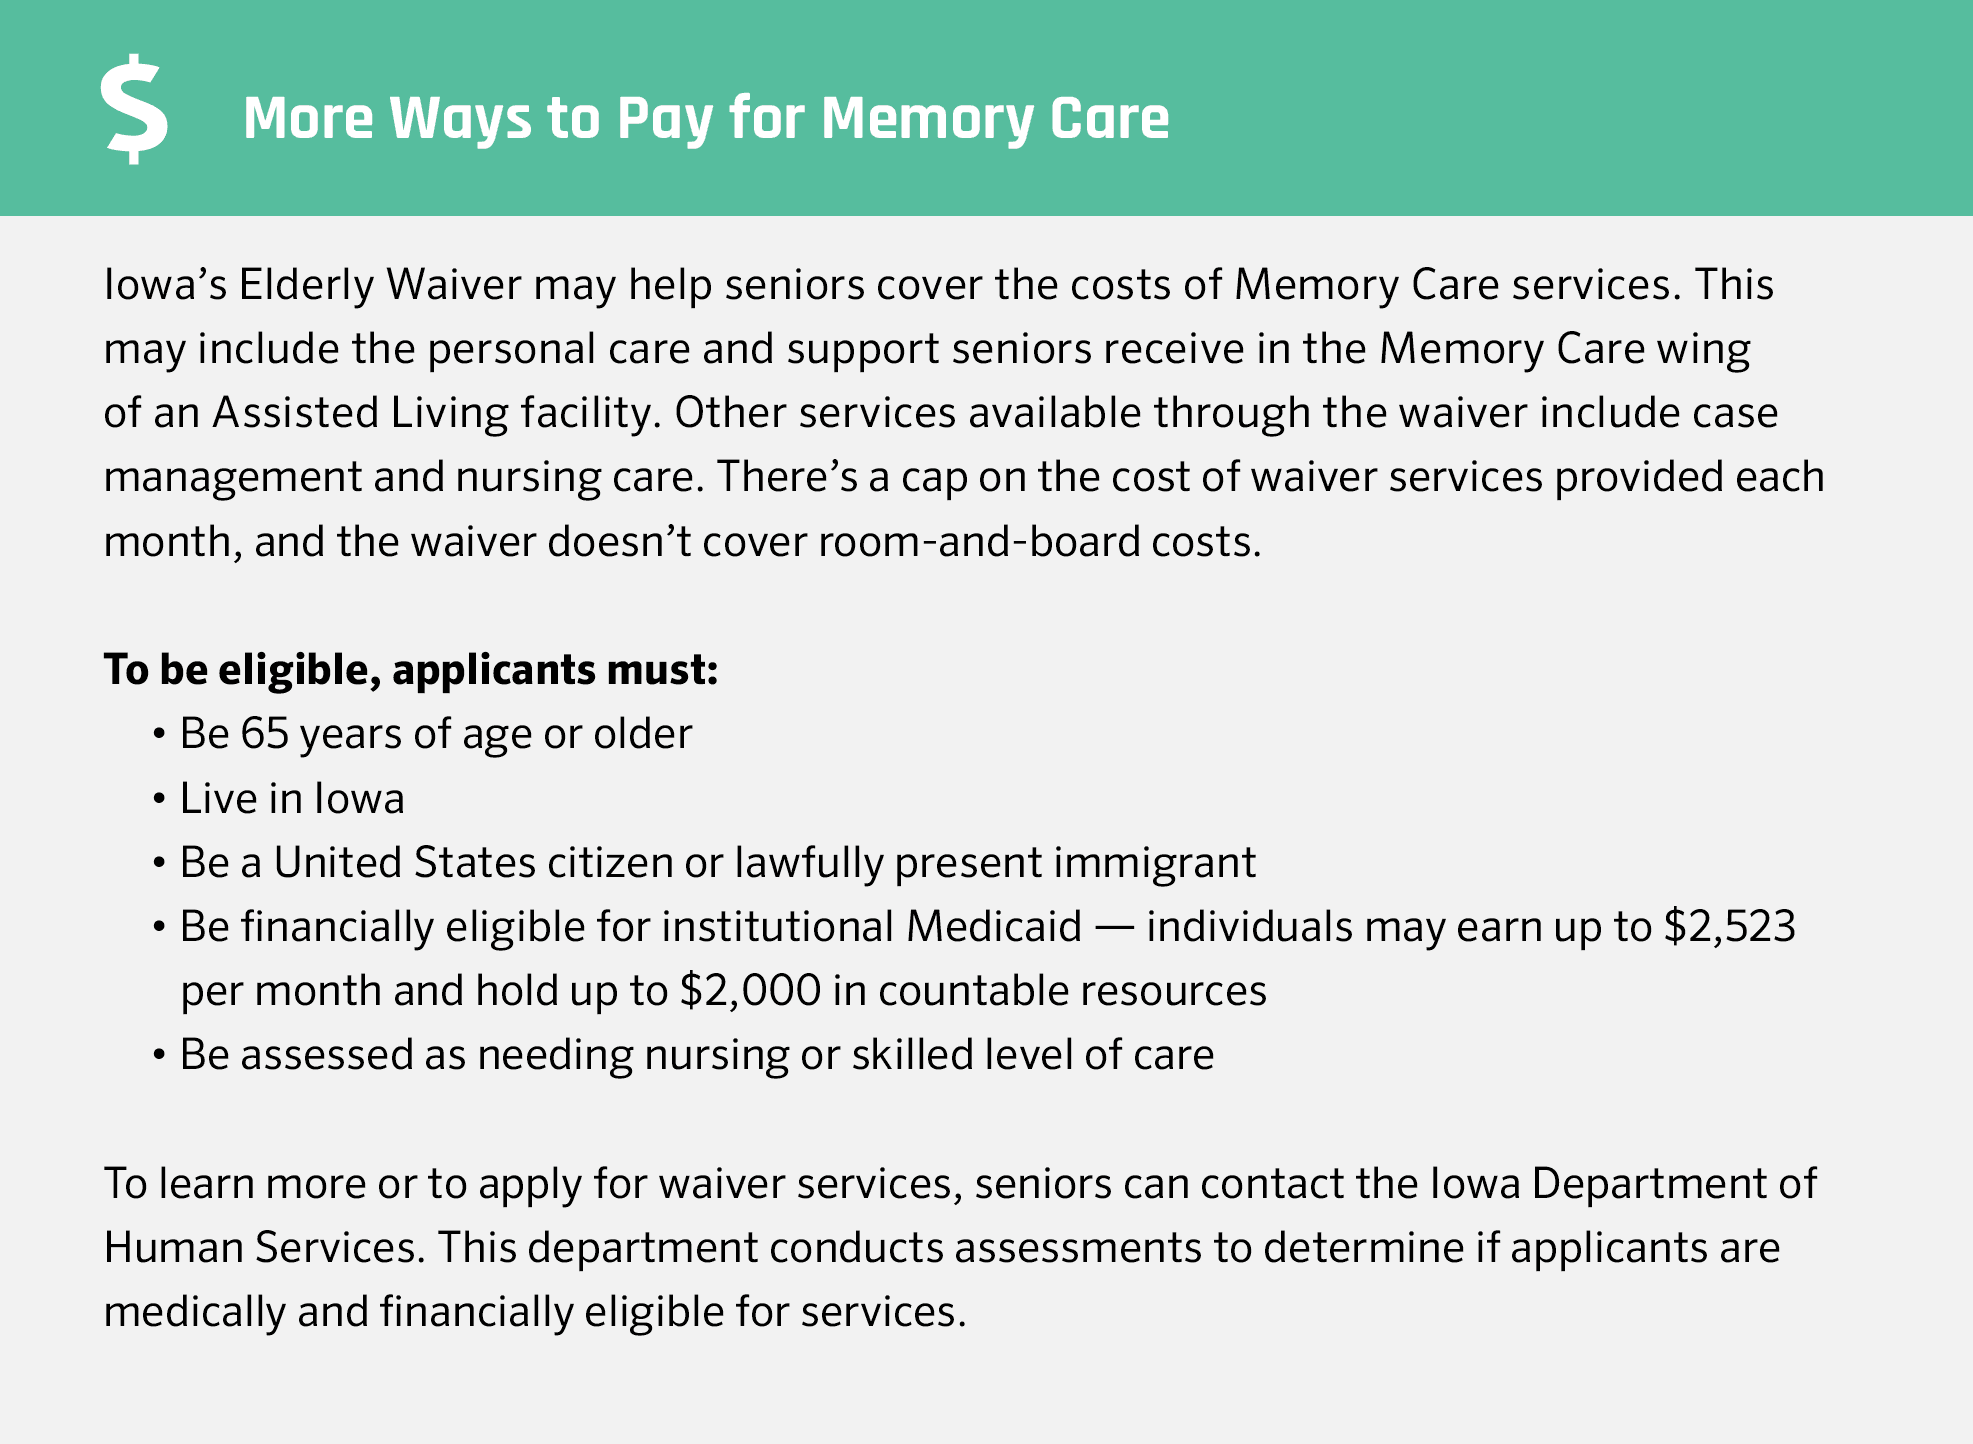 More ways to pay for memory care in Iowa